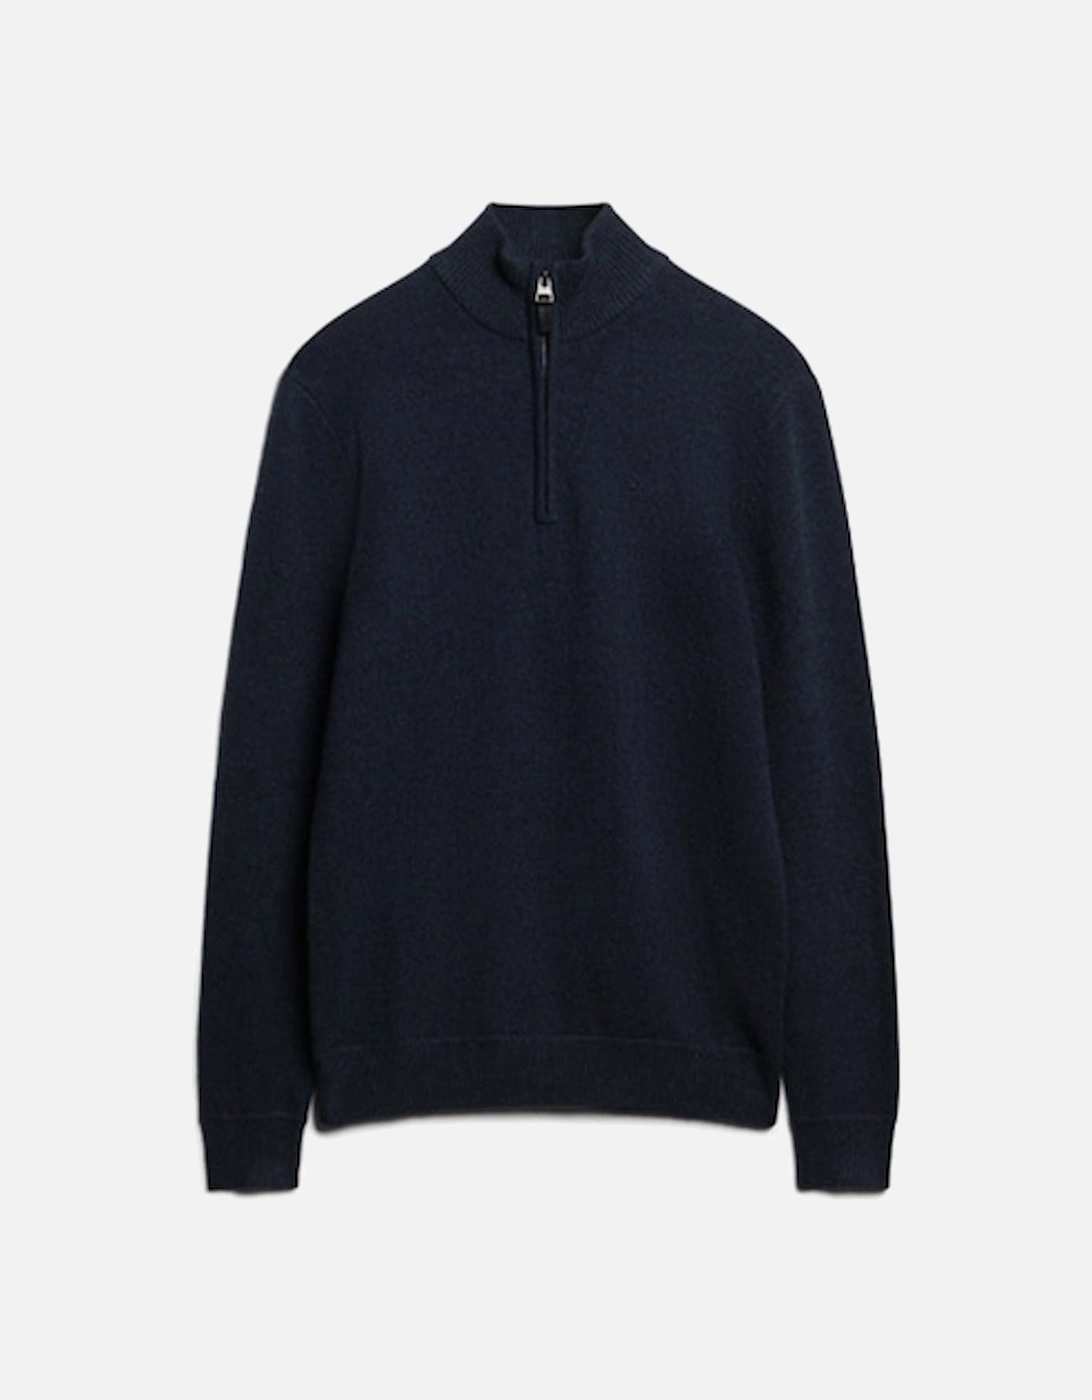 Men's Henley Essential Embroidered Knit Carbon Navy Marl